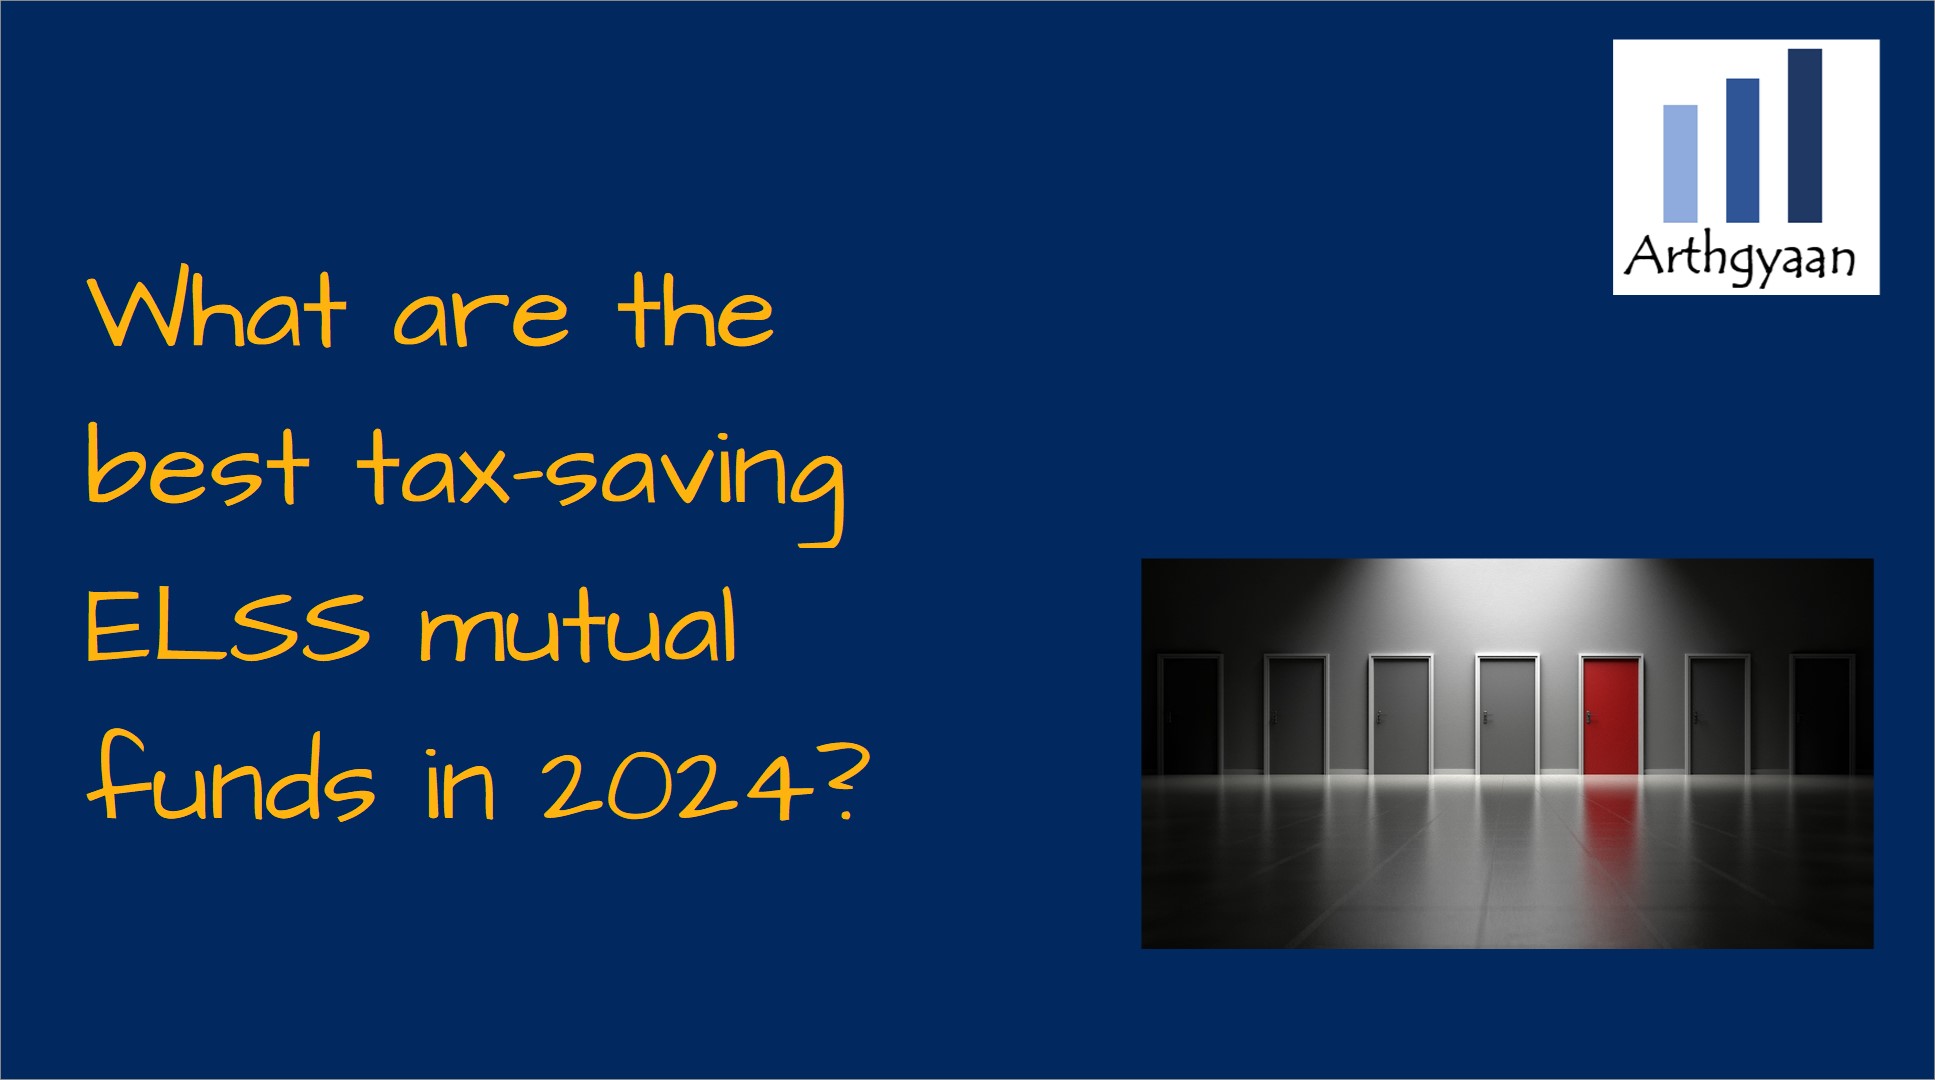 What are the best tax-saving ELSS mutual funds in 2024?